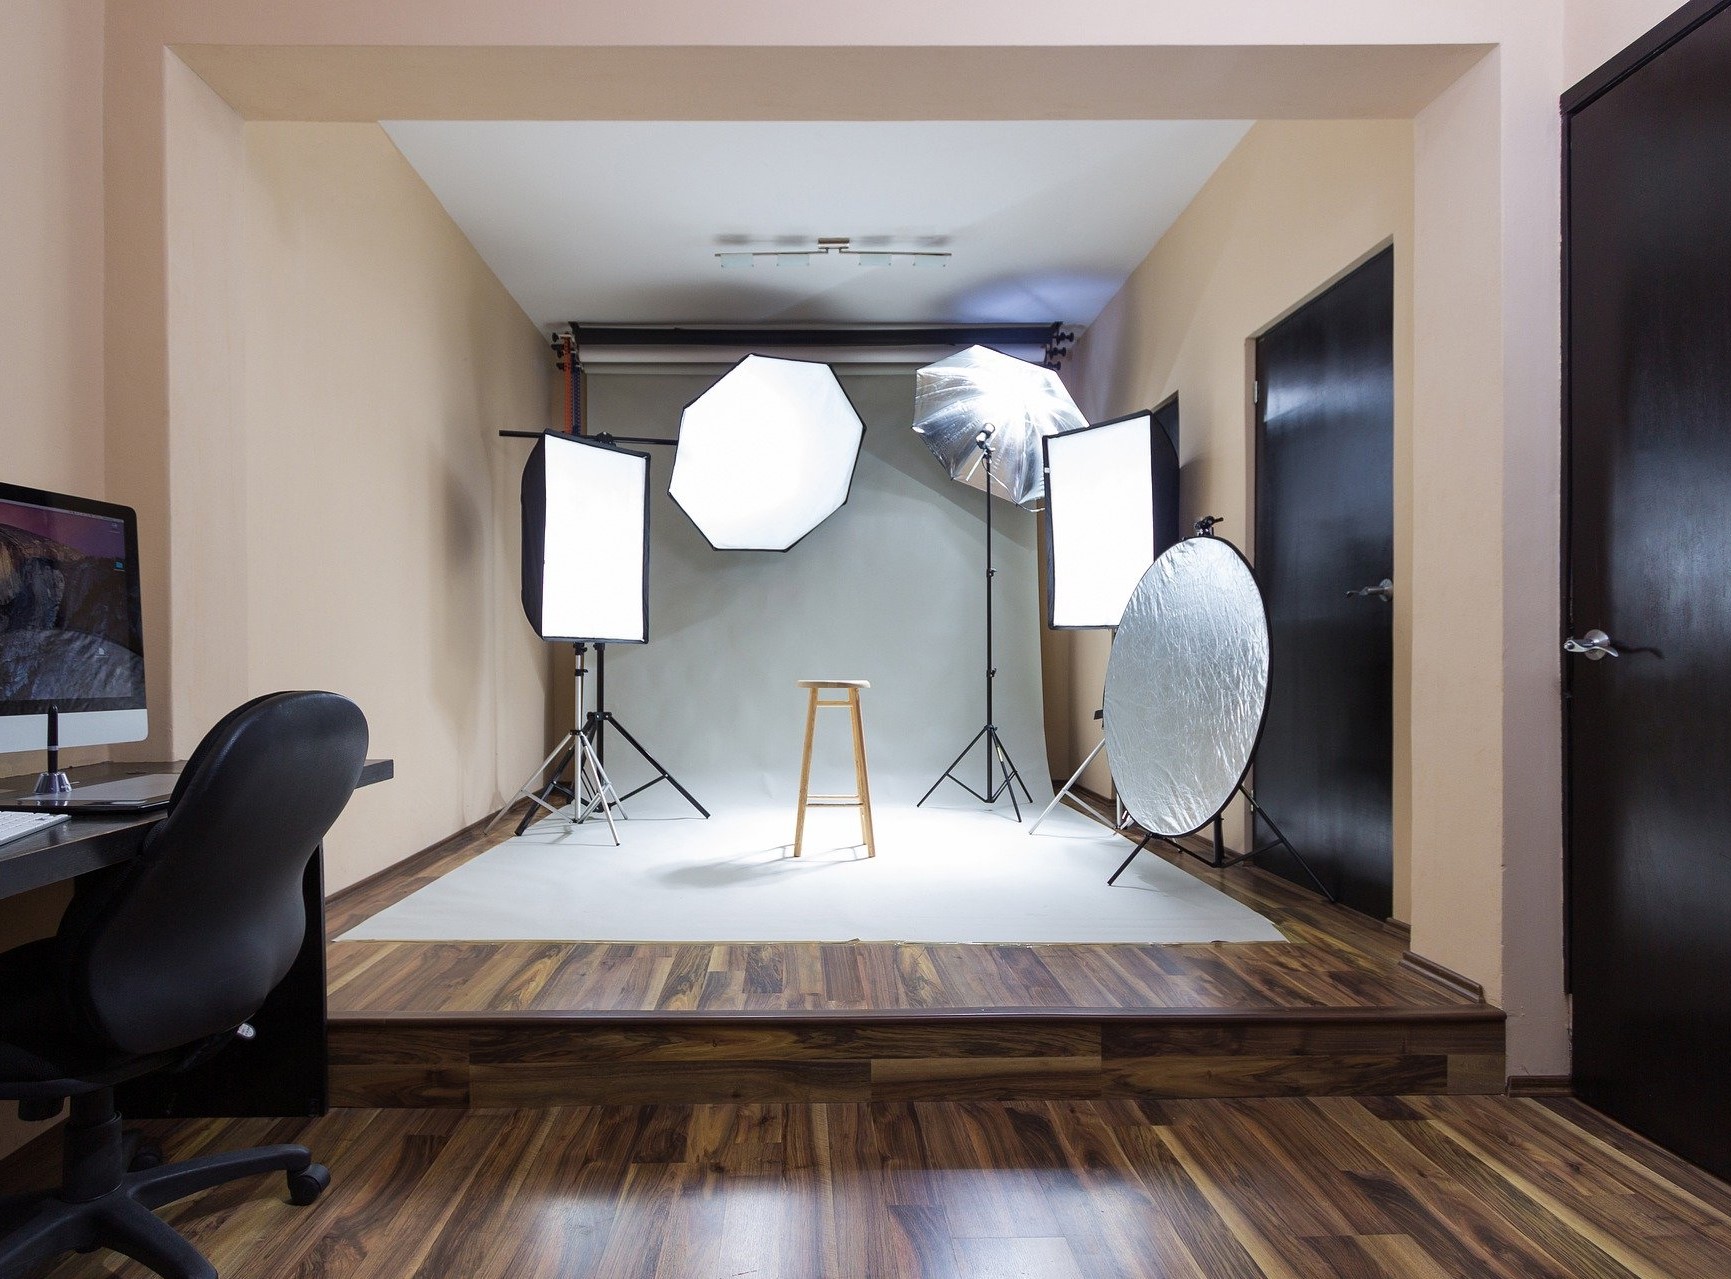 Example of Natural Light Product Photography Studio Set-up 